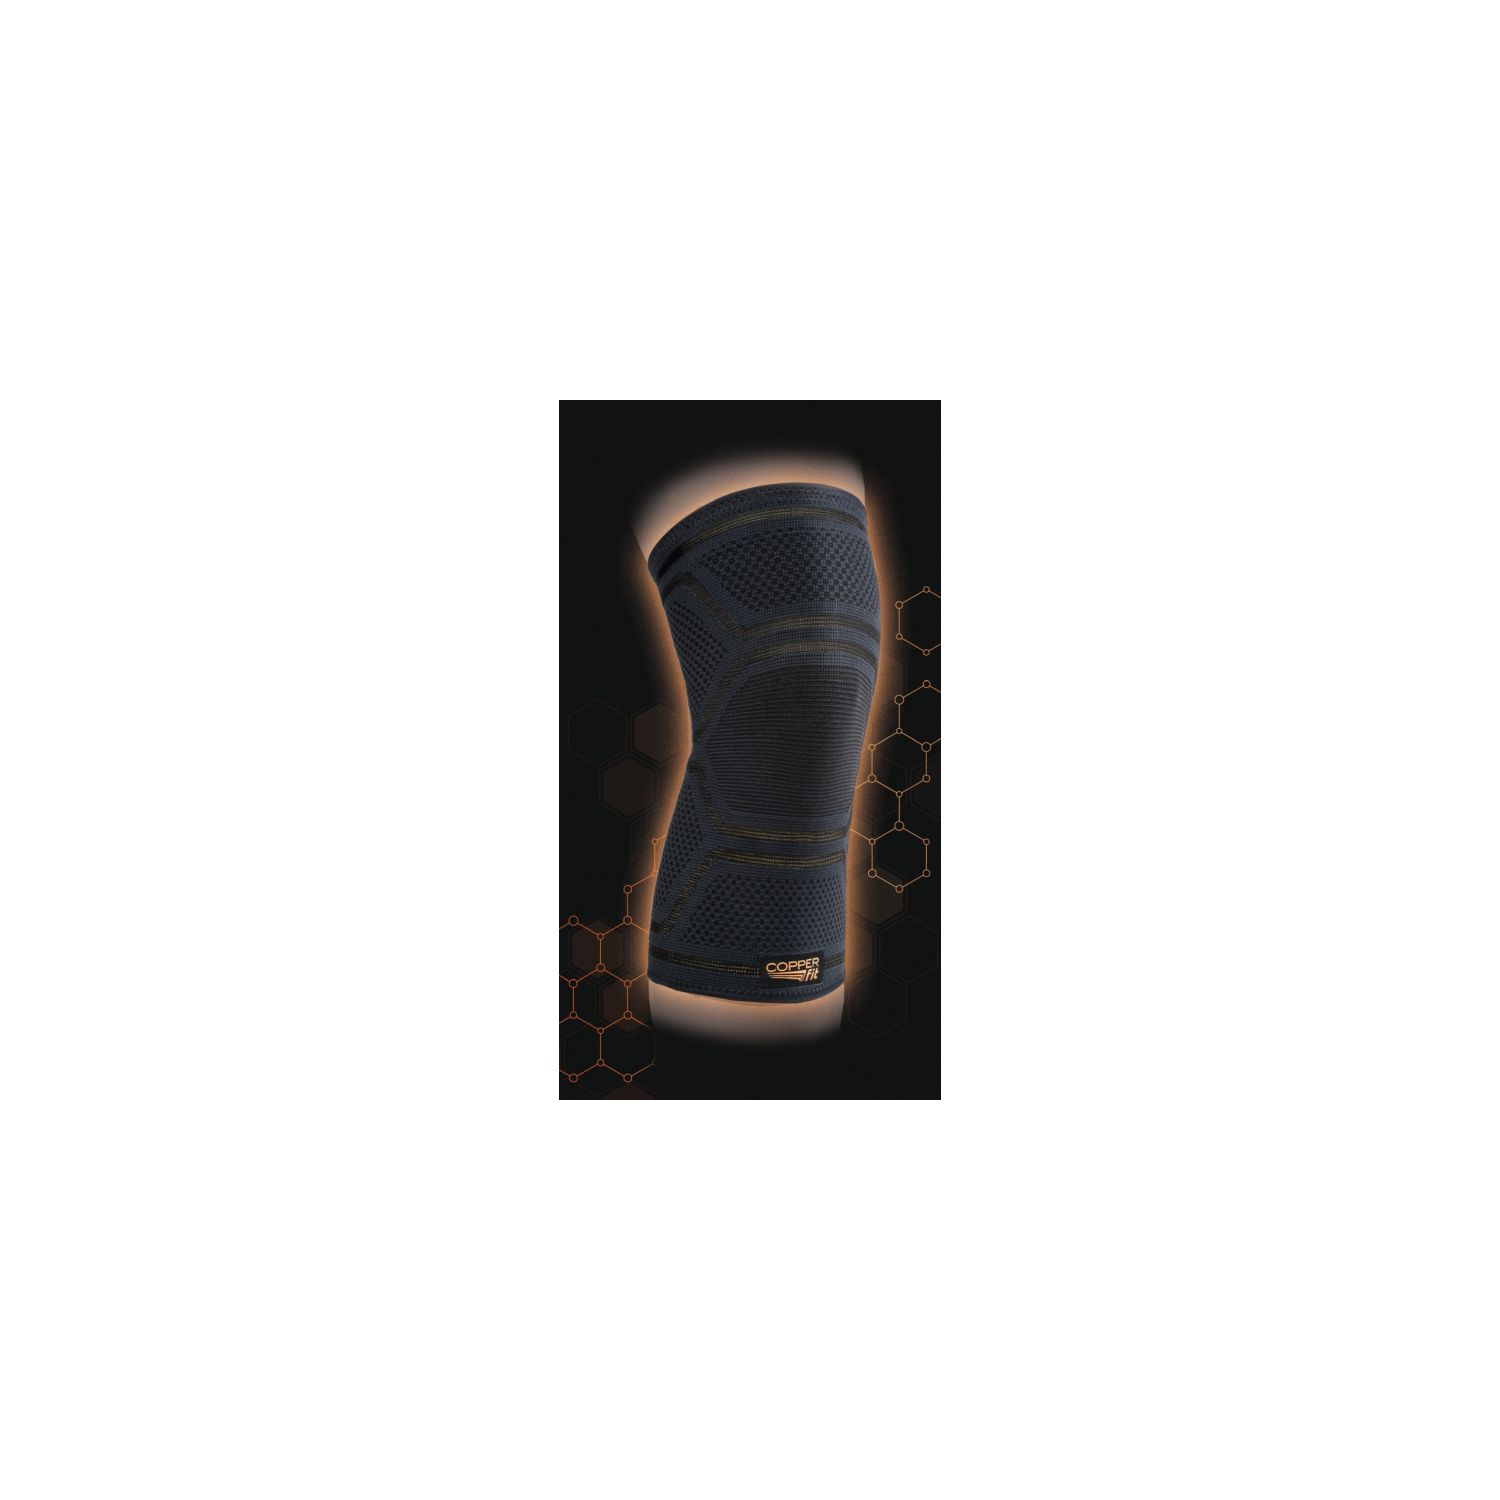 Copper Fit - Pro Series Knee Sleeve at